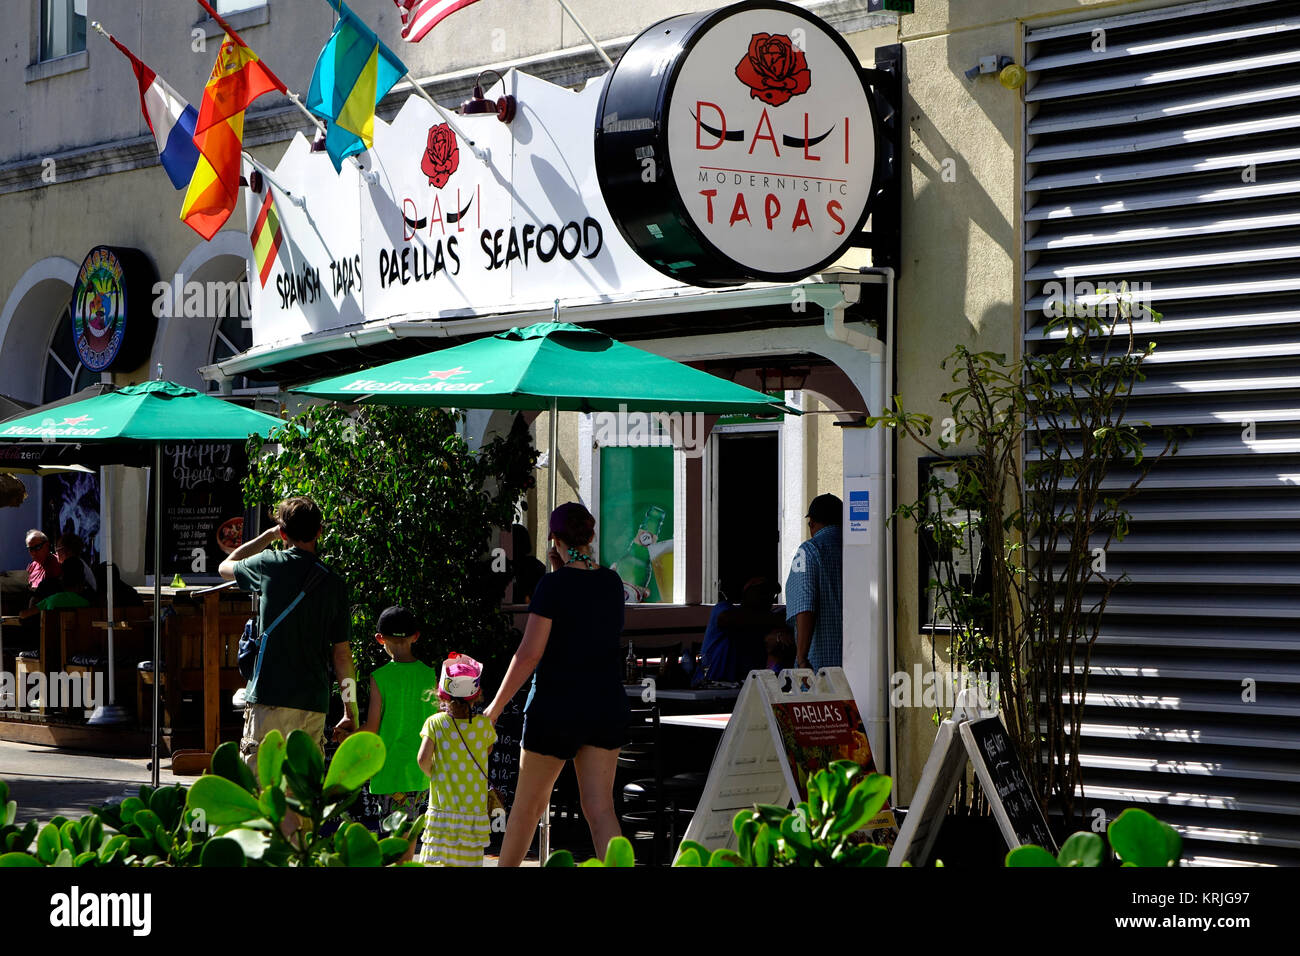 Dali is a locally owned fresh food restaurant in Nassau, Bahamas serving seafood and drinks. Stock Photo